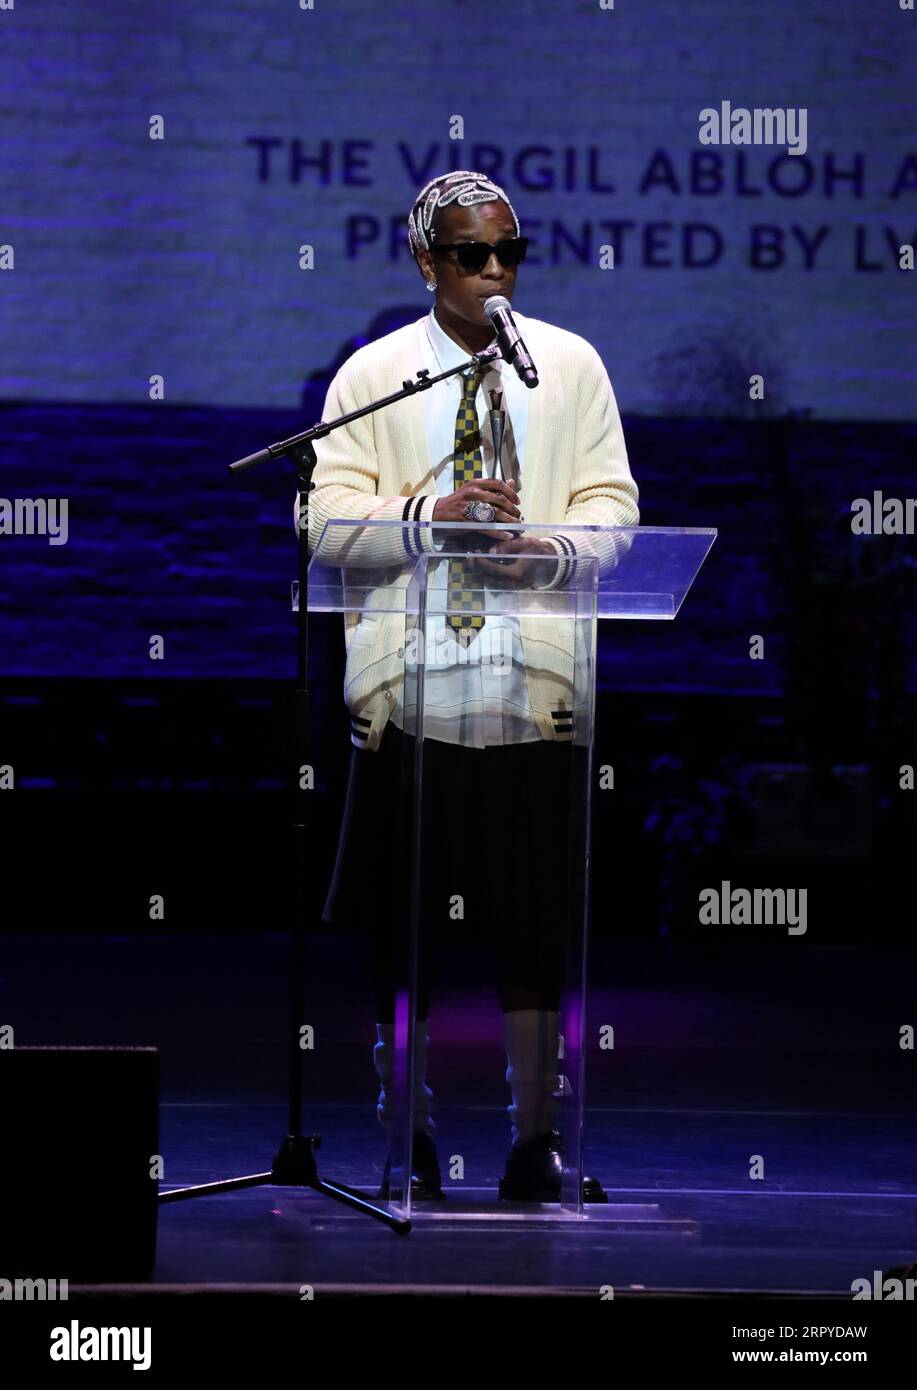 A$AP Rocky Honored With Virgil Abloh Award